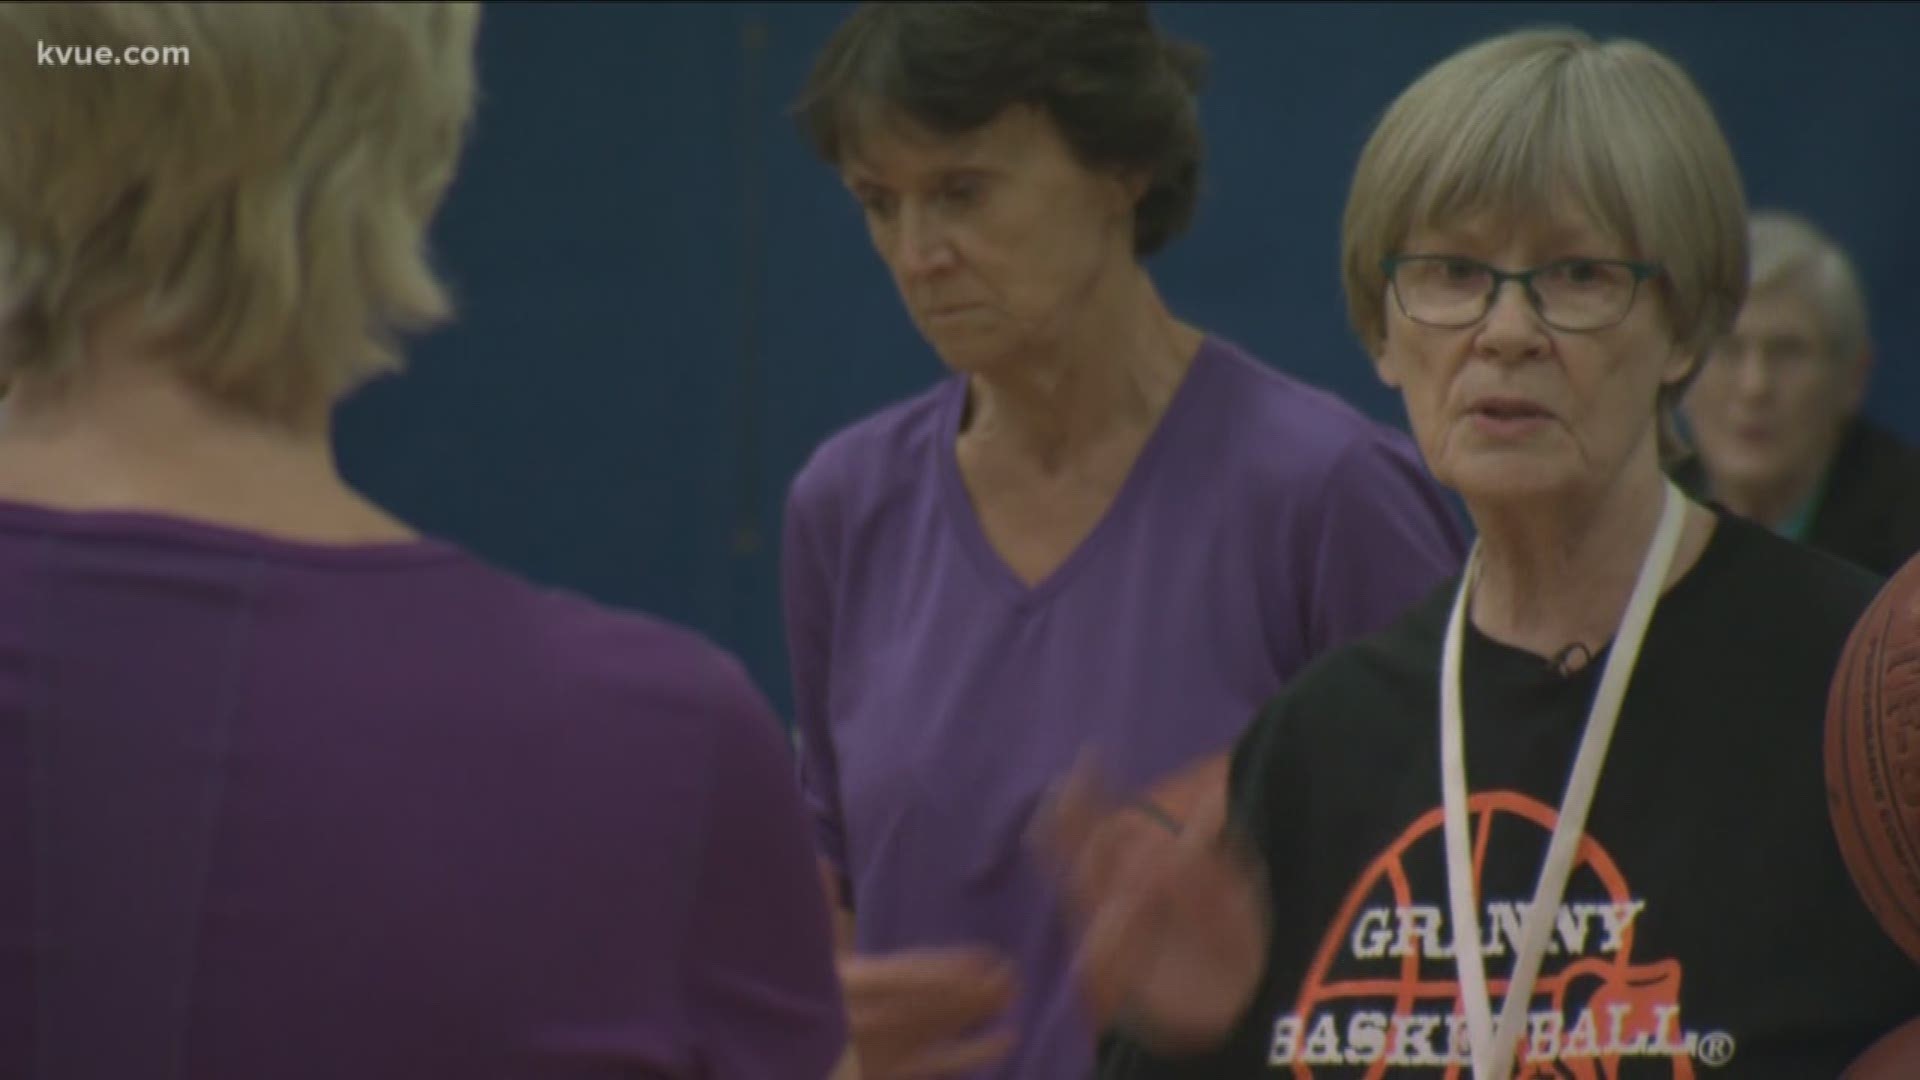 Hank Cavagnaro spoke with the ladies of the new "Granny Basketball" team in Round Rock.